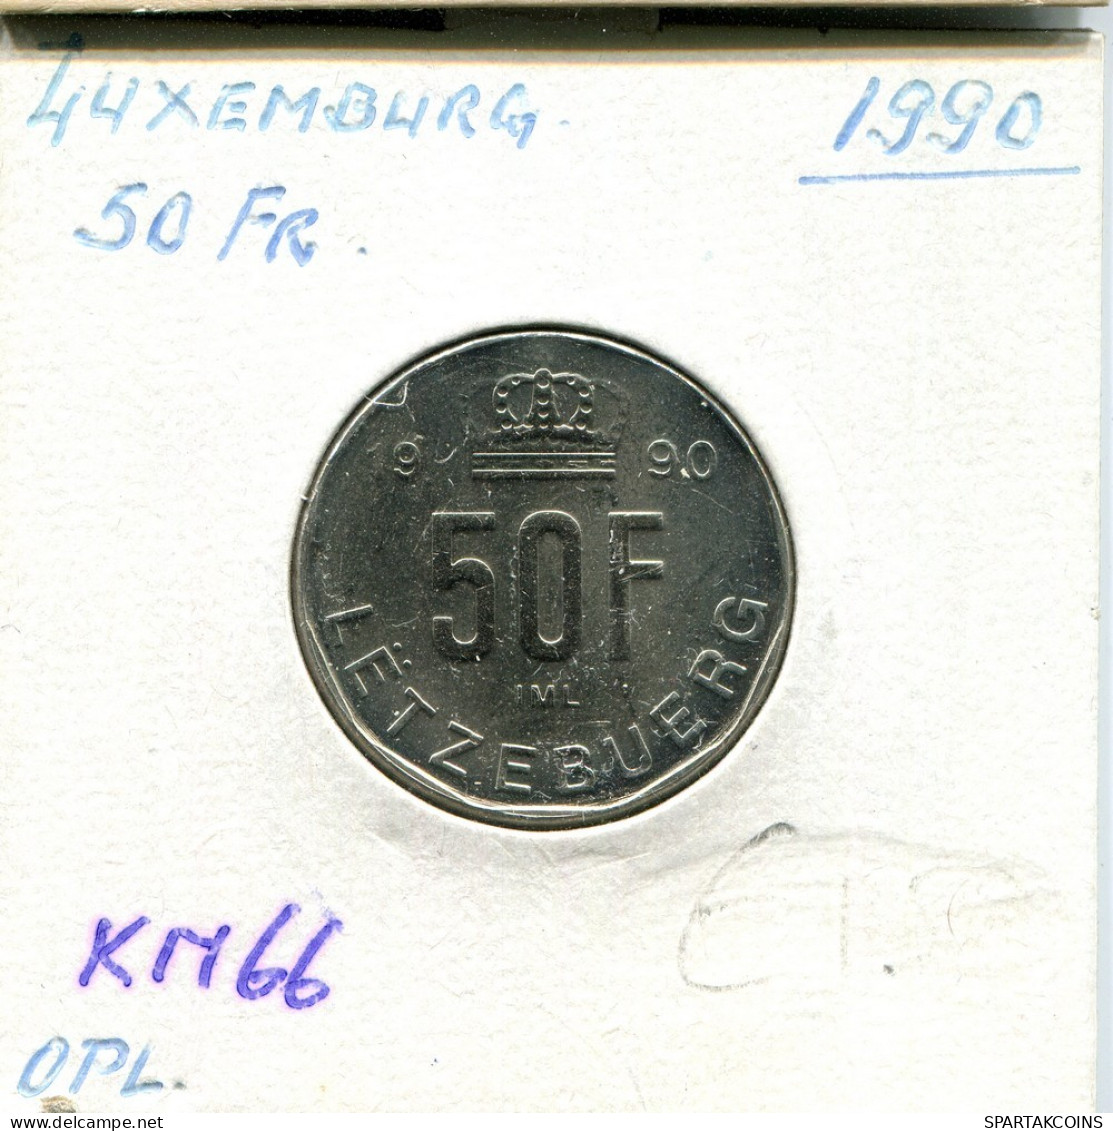 50 FRANCS 1990 LUXEMBURG LUXEMBOURG Münze #AT253.D.A - Luxembourg